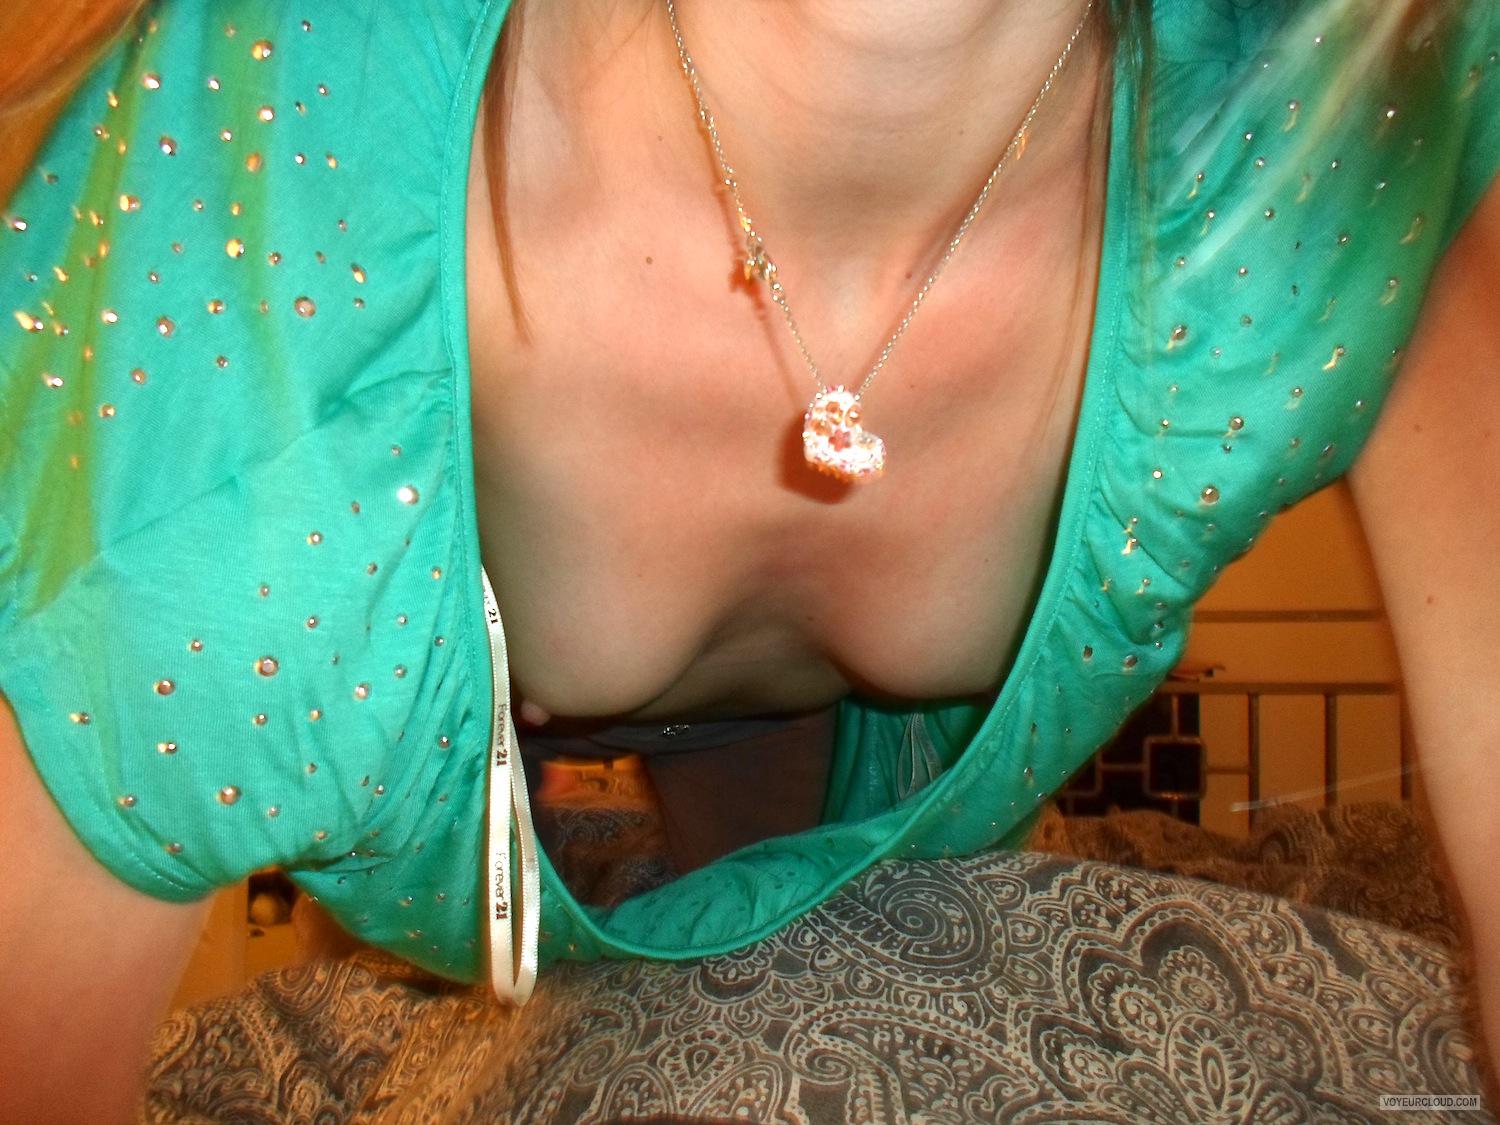 Small Breast Downblouse Bobs And Vagene